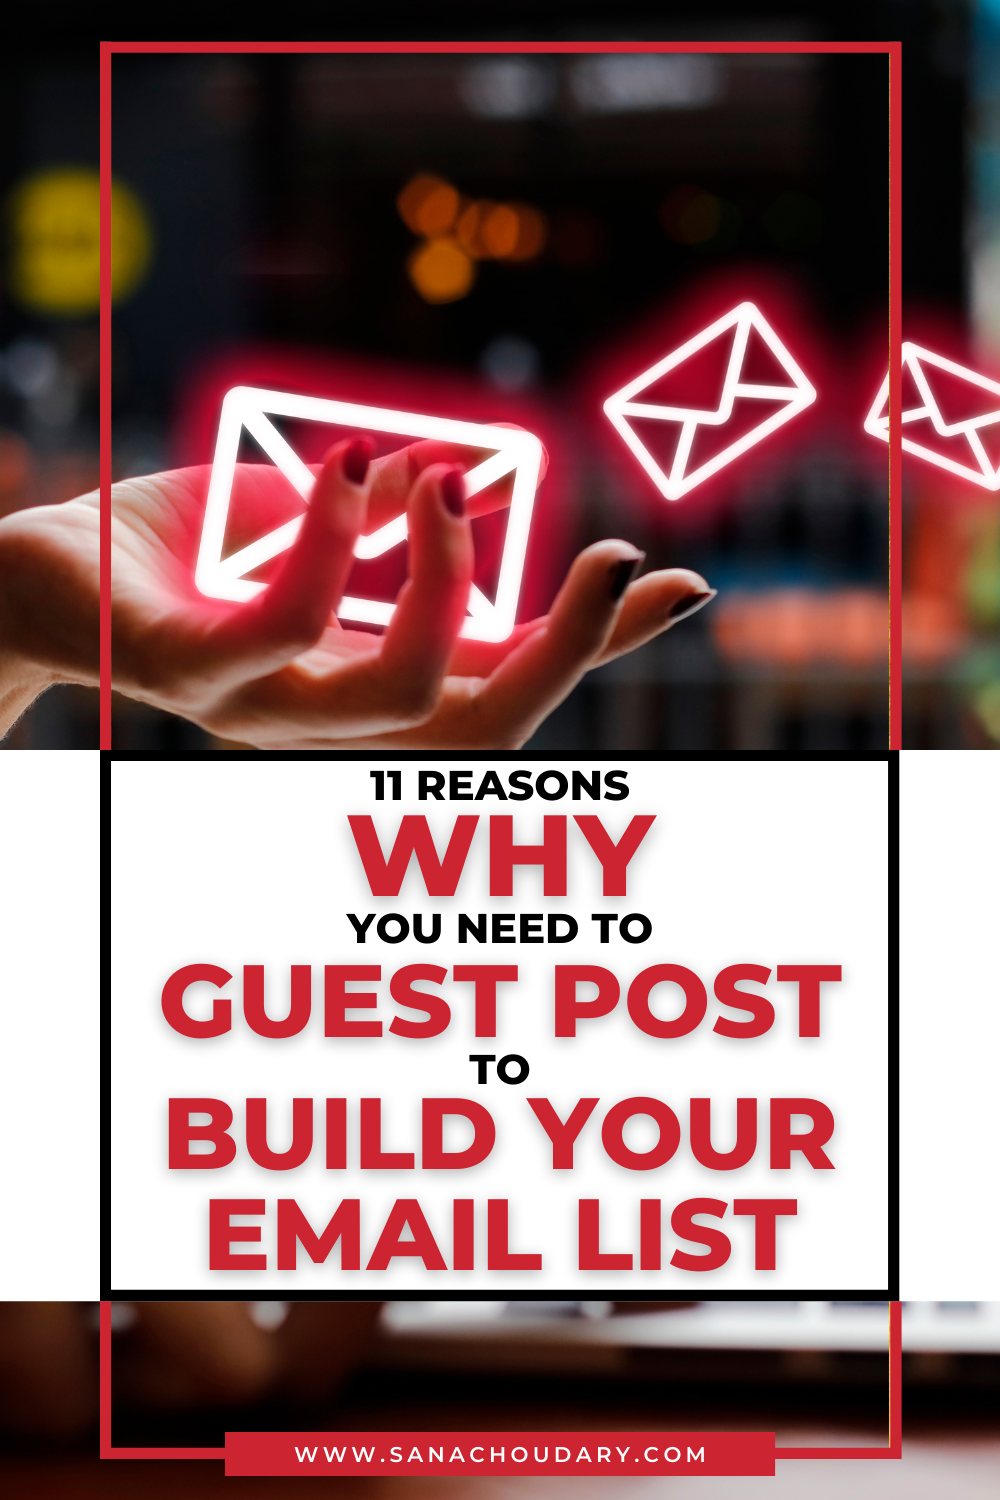 11 Reasons Why You Need to Guest Post to Build Your Email List